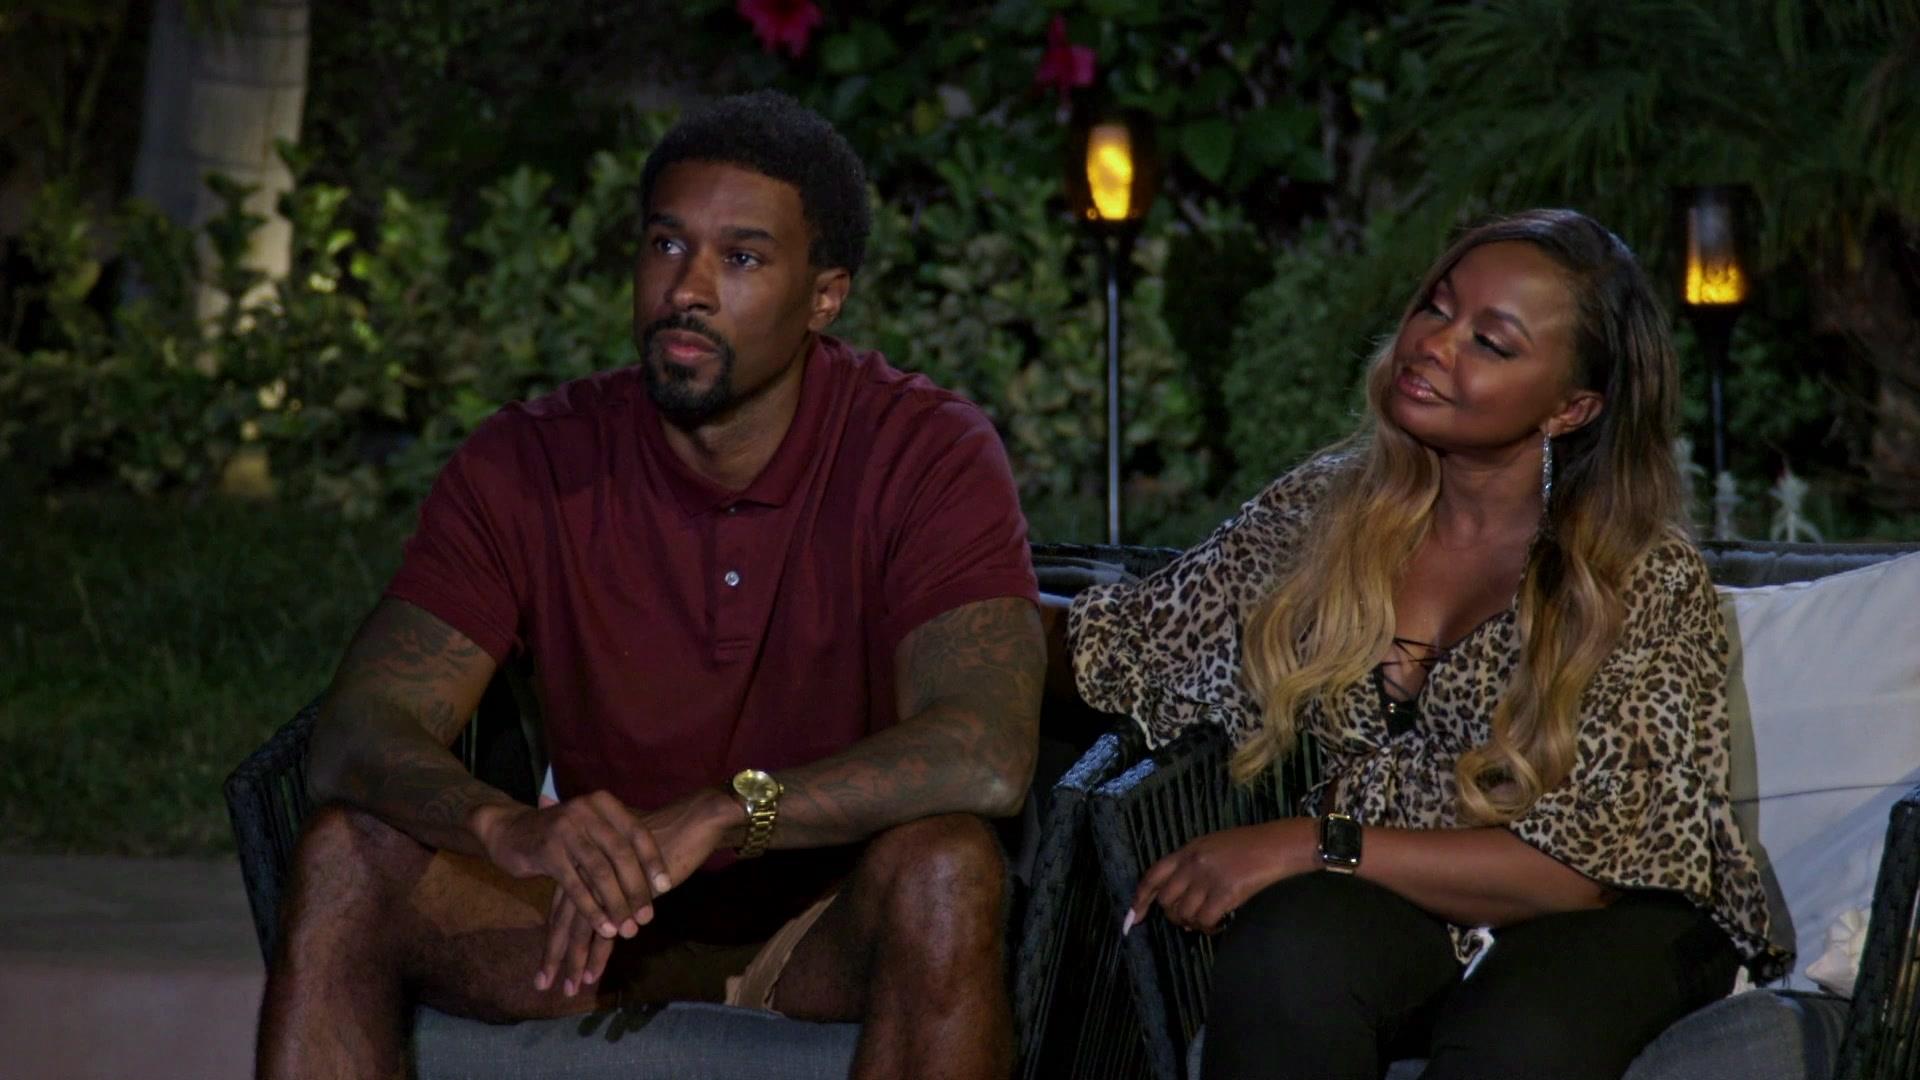 Watch Phaedra & Medina's Shocking Past | Marriage Boot Camp: Hip Hop Edition Video Extras